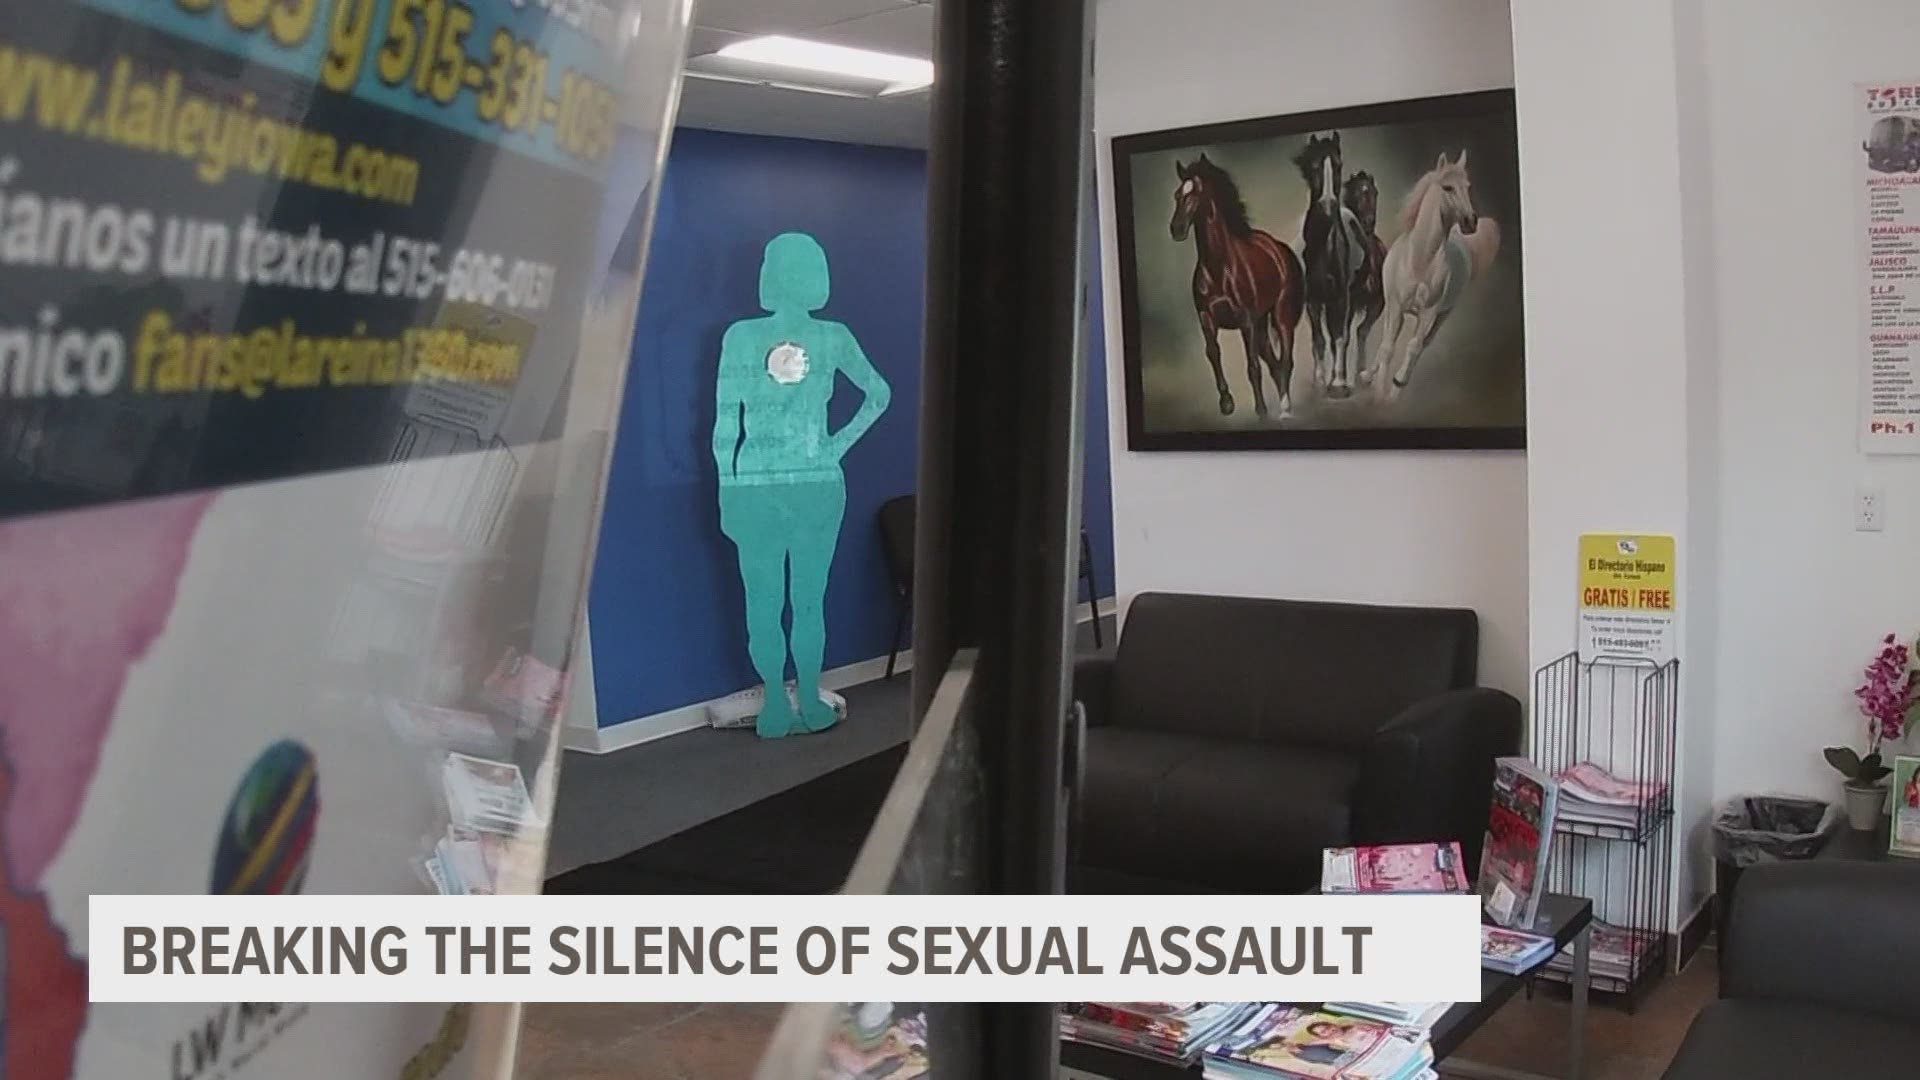 Nonprofit organization L.U.N.A placed turquoise silhouettes in areas frequented by the Latinx community, to raise awareness about sexual assault.